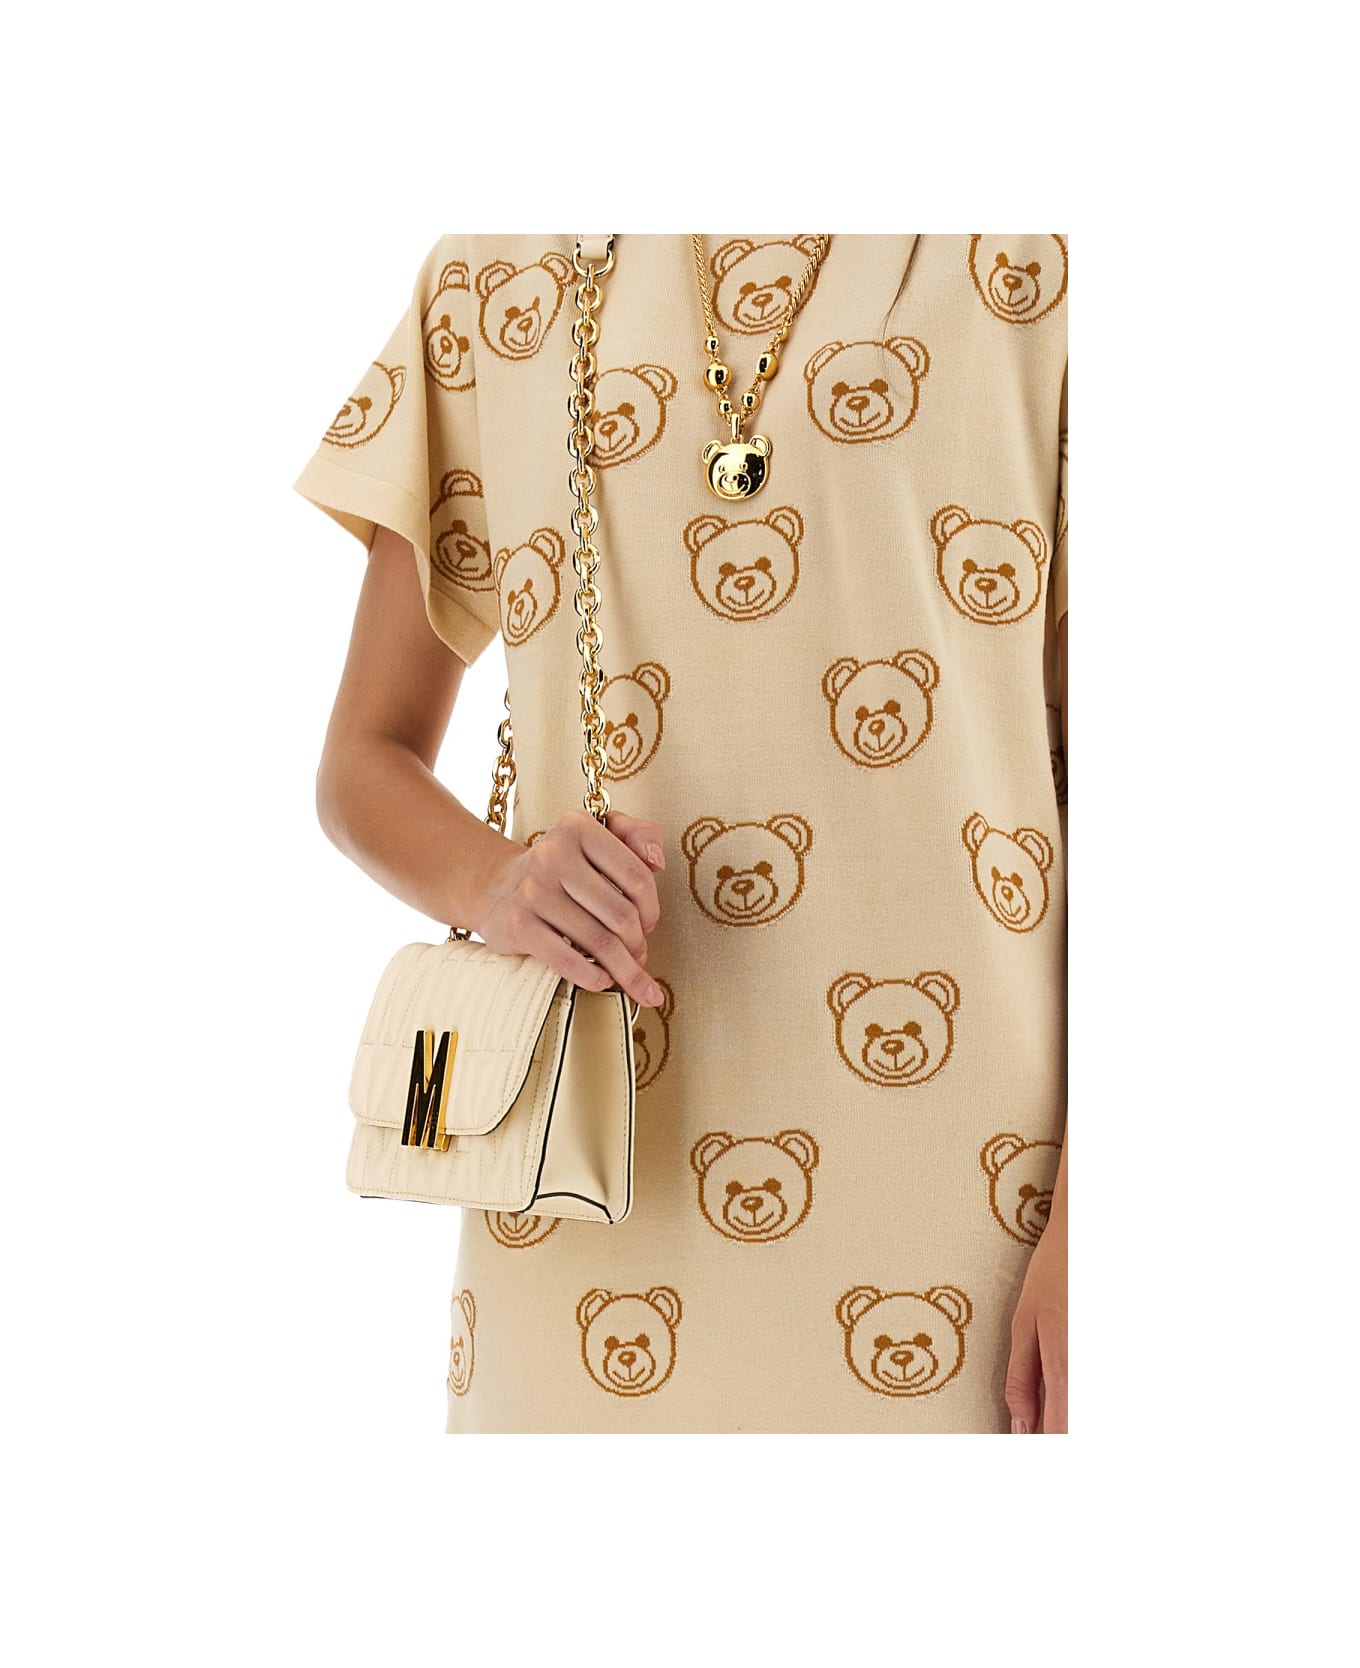 Moschino Dress With Teddy Bear Embroidery - IVORY